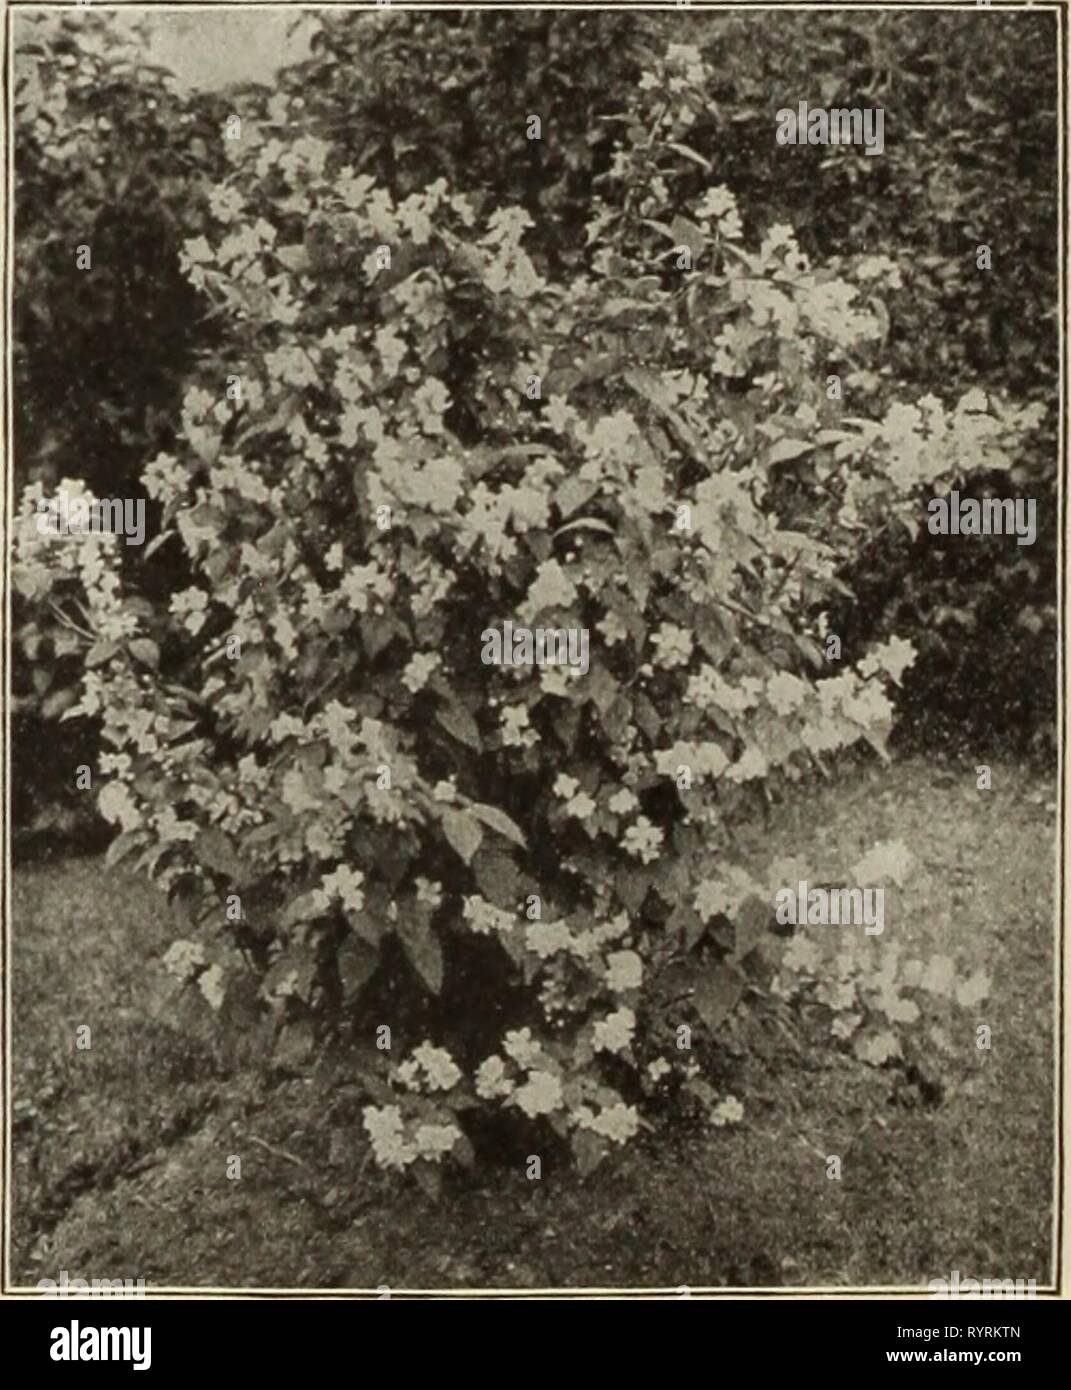 Dreer's mid-summer catalogue 1915 (1915) Dreer's mid-summer catalogue 1915 . dreersmidsummerc1915henr Year: 1915  Japanese Maples. Ligustrum Ovaiifolium Aureum ( 0olden-leaved Privet). A beautiful golden variegated form and very efTective for associating witli other dwarf shrubs. 35 cts. each. Lonicera Tartarica ( 7Vn7nr)V7H fT'inei/nucklr). Pink flow- ers, contrasting beautifully with the foliage; bloani&gt; in June. 3-5 cts. each. — Virginalls alba. A creamy-white coloied variety of ihe above, flowering during May and June. 35 cts. each. JVlagnolia Alba Superba. .- very choice variety, bear Stock Photo